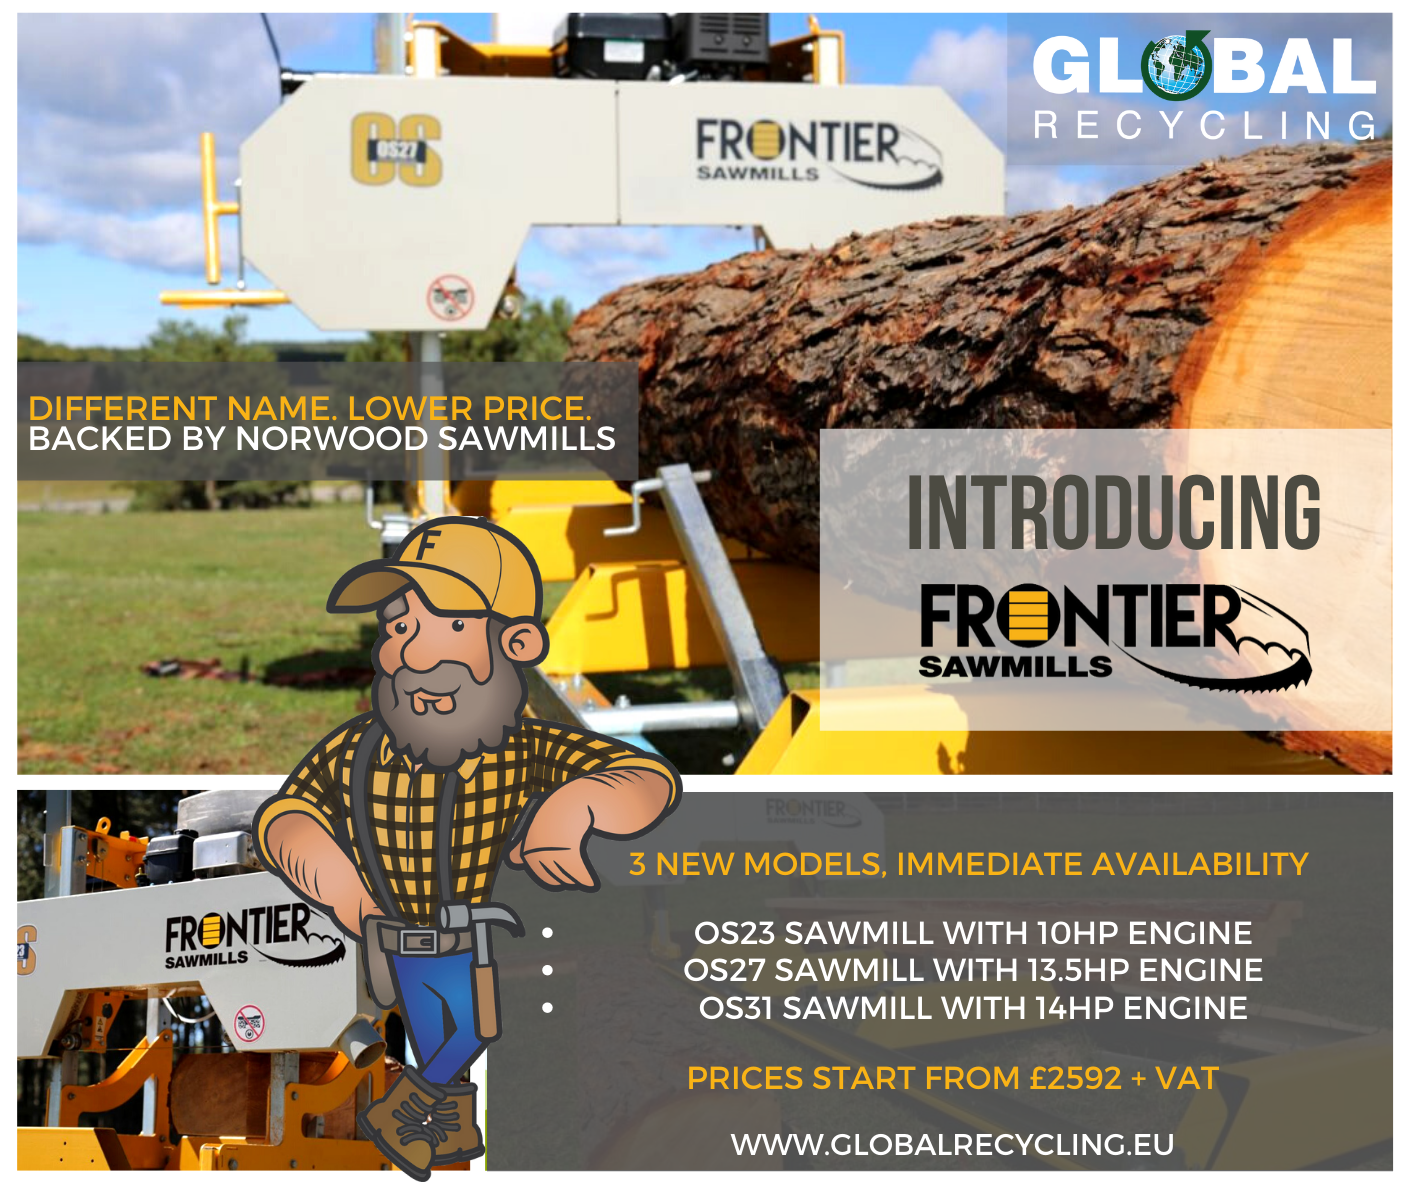 Introducing Frontier Sawmills